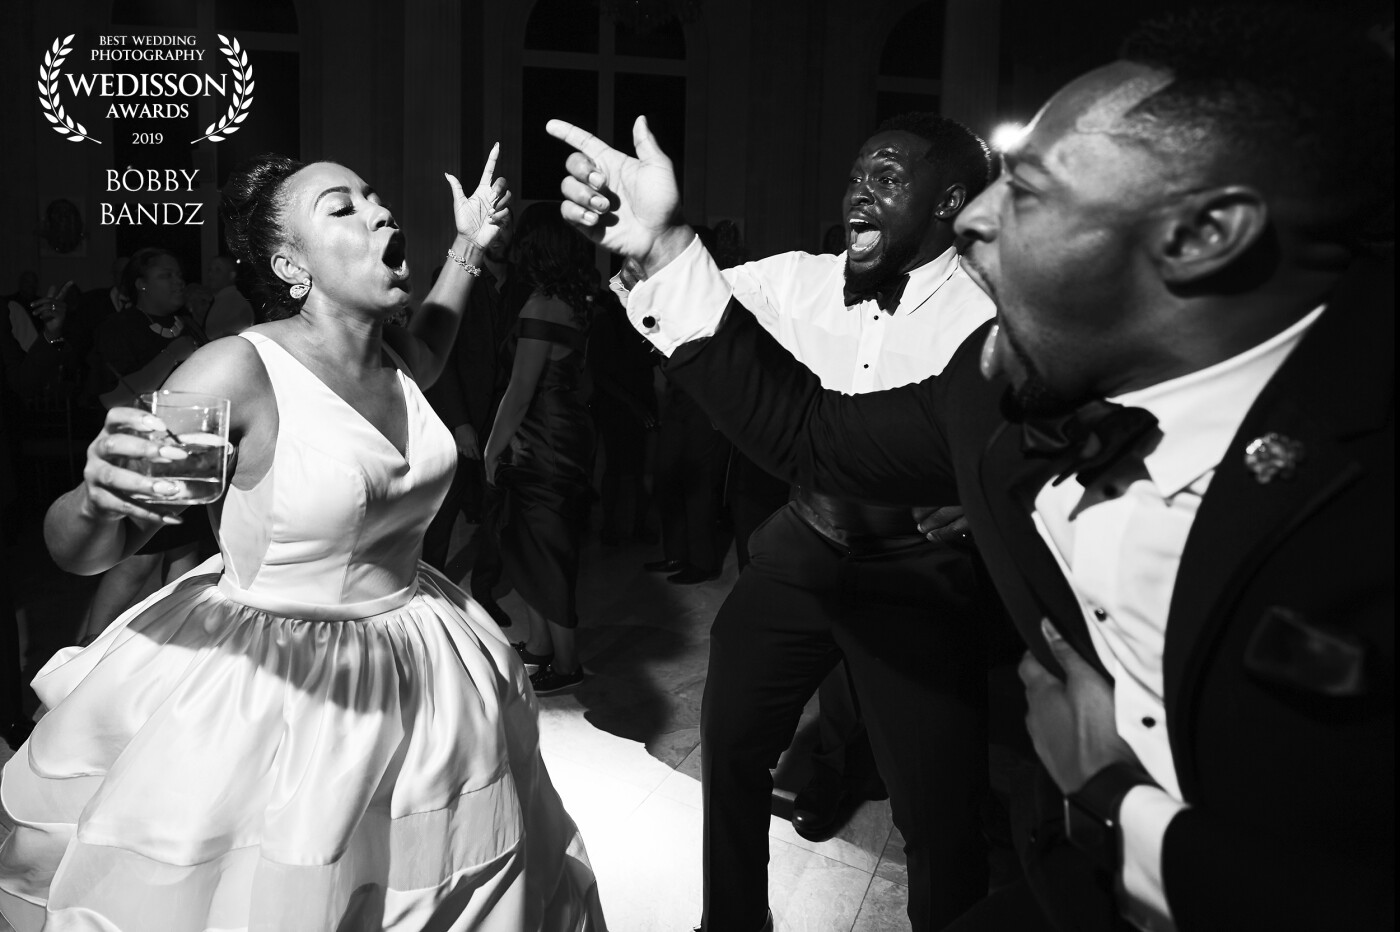 Sometimes a dance battle turns into a rap battle! The 2 groomsmen didn't have anything on the bride though during this one! She won for sure!